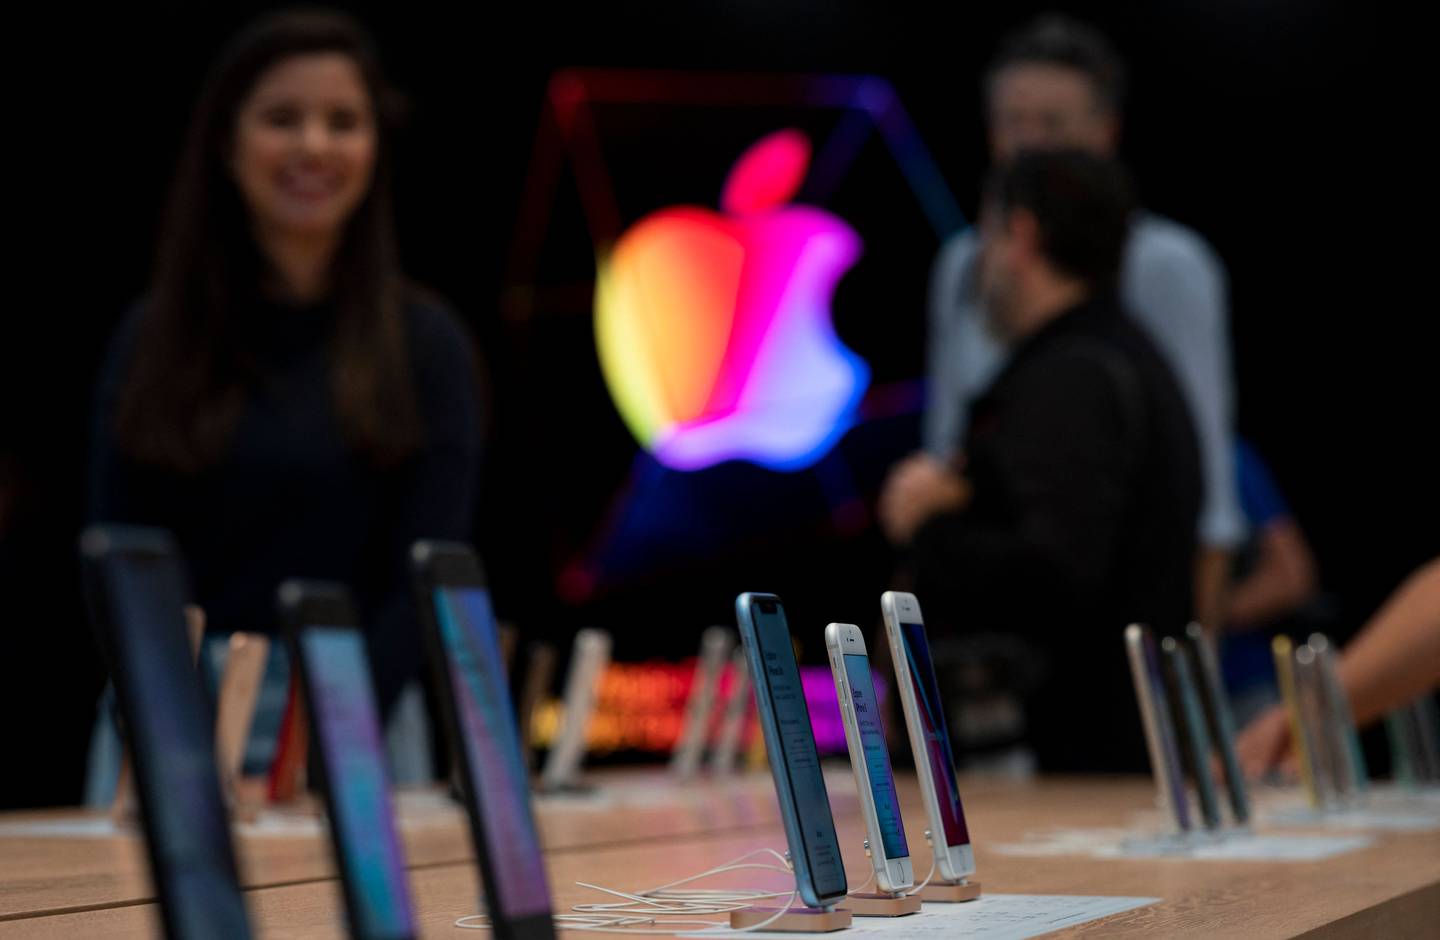 Apple is expected to launch its iPhone 14 series smartphones in September. AFP